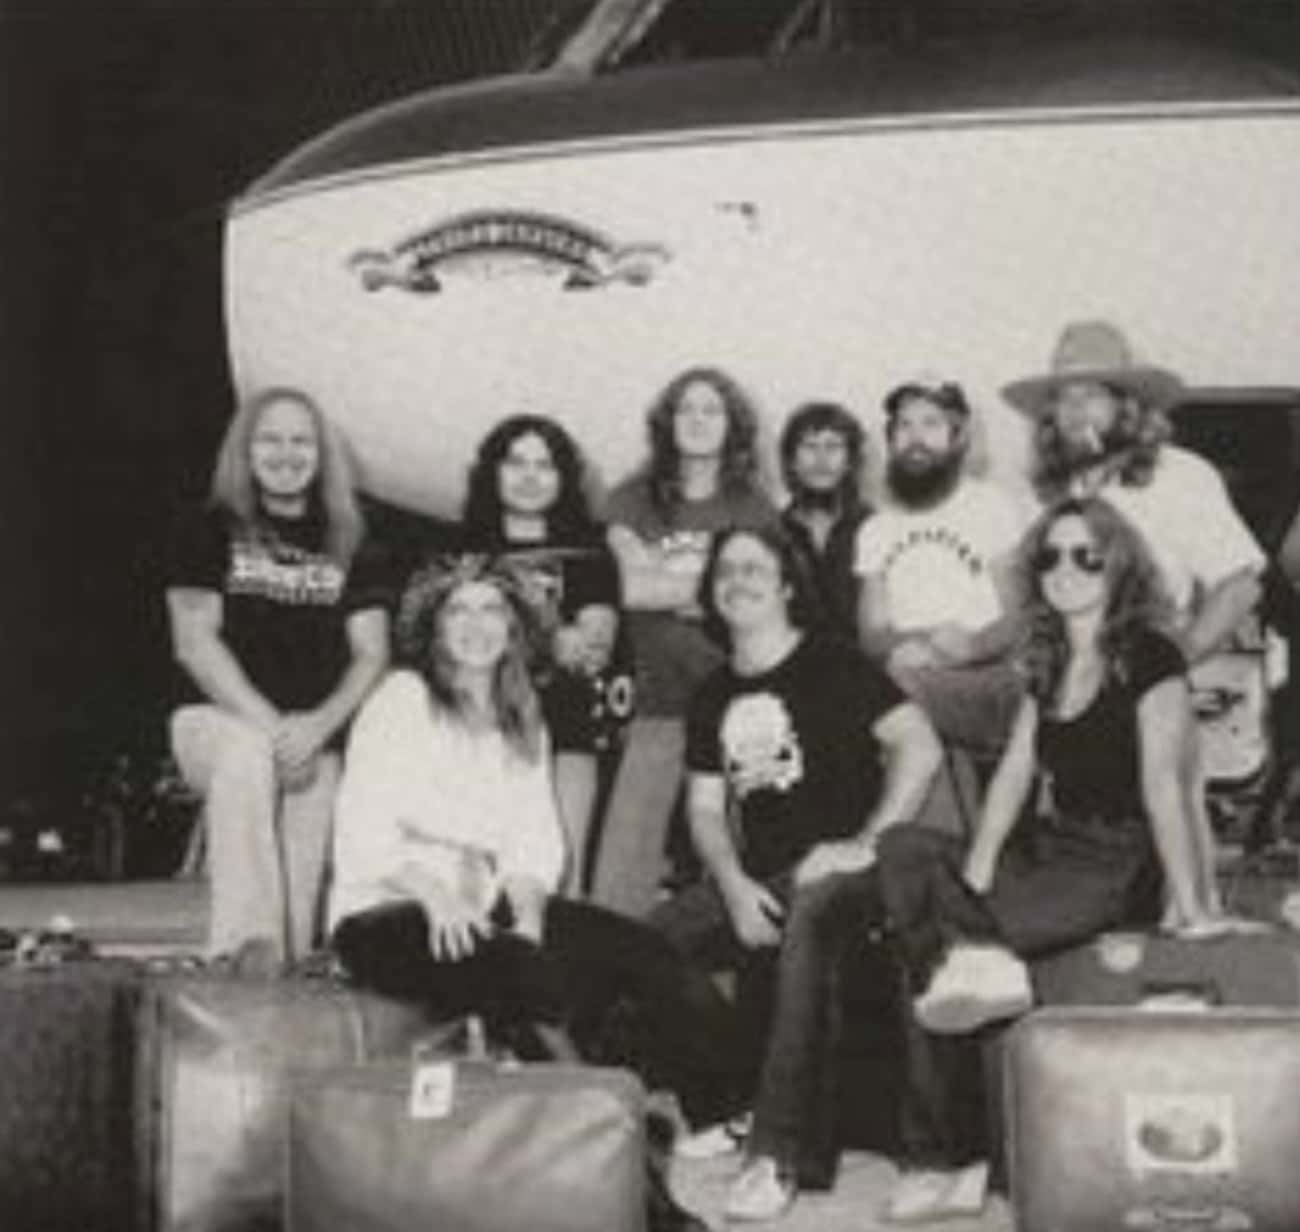 In 1977, Lynyrd Skynyrd Was On Tour For Their Fifth Album And It Was Their Biggest To Date